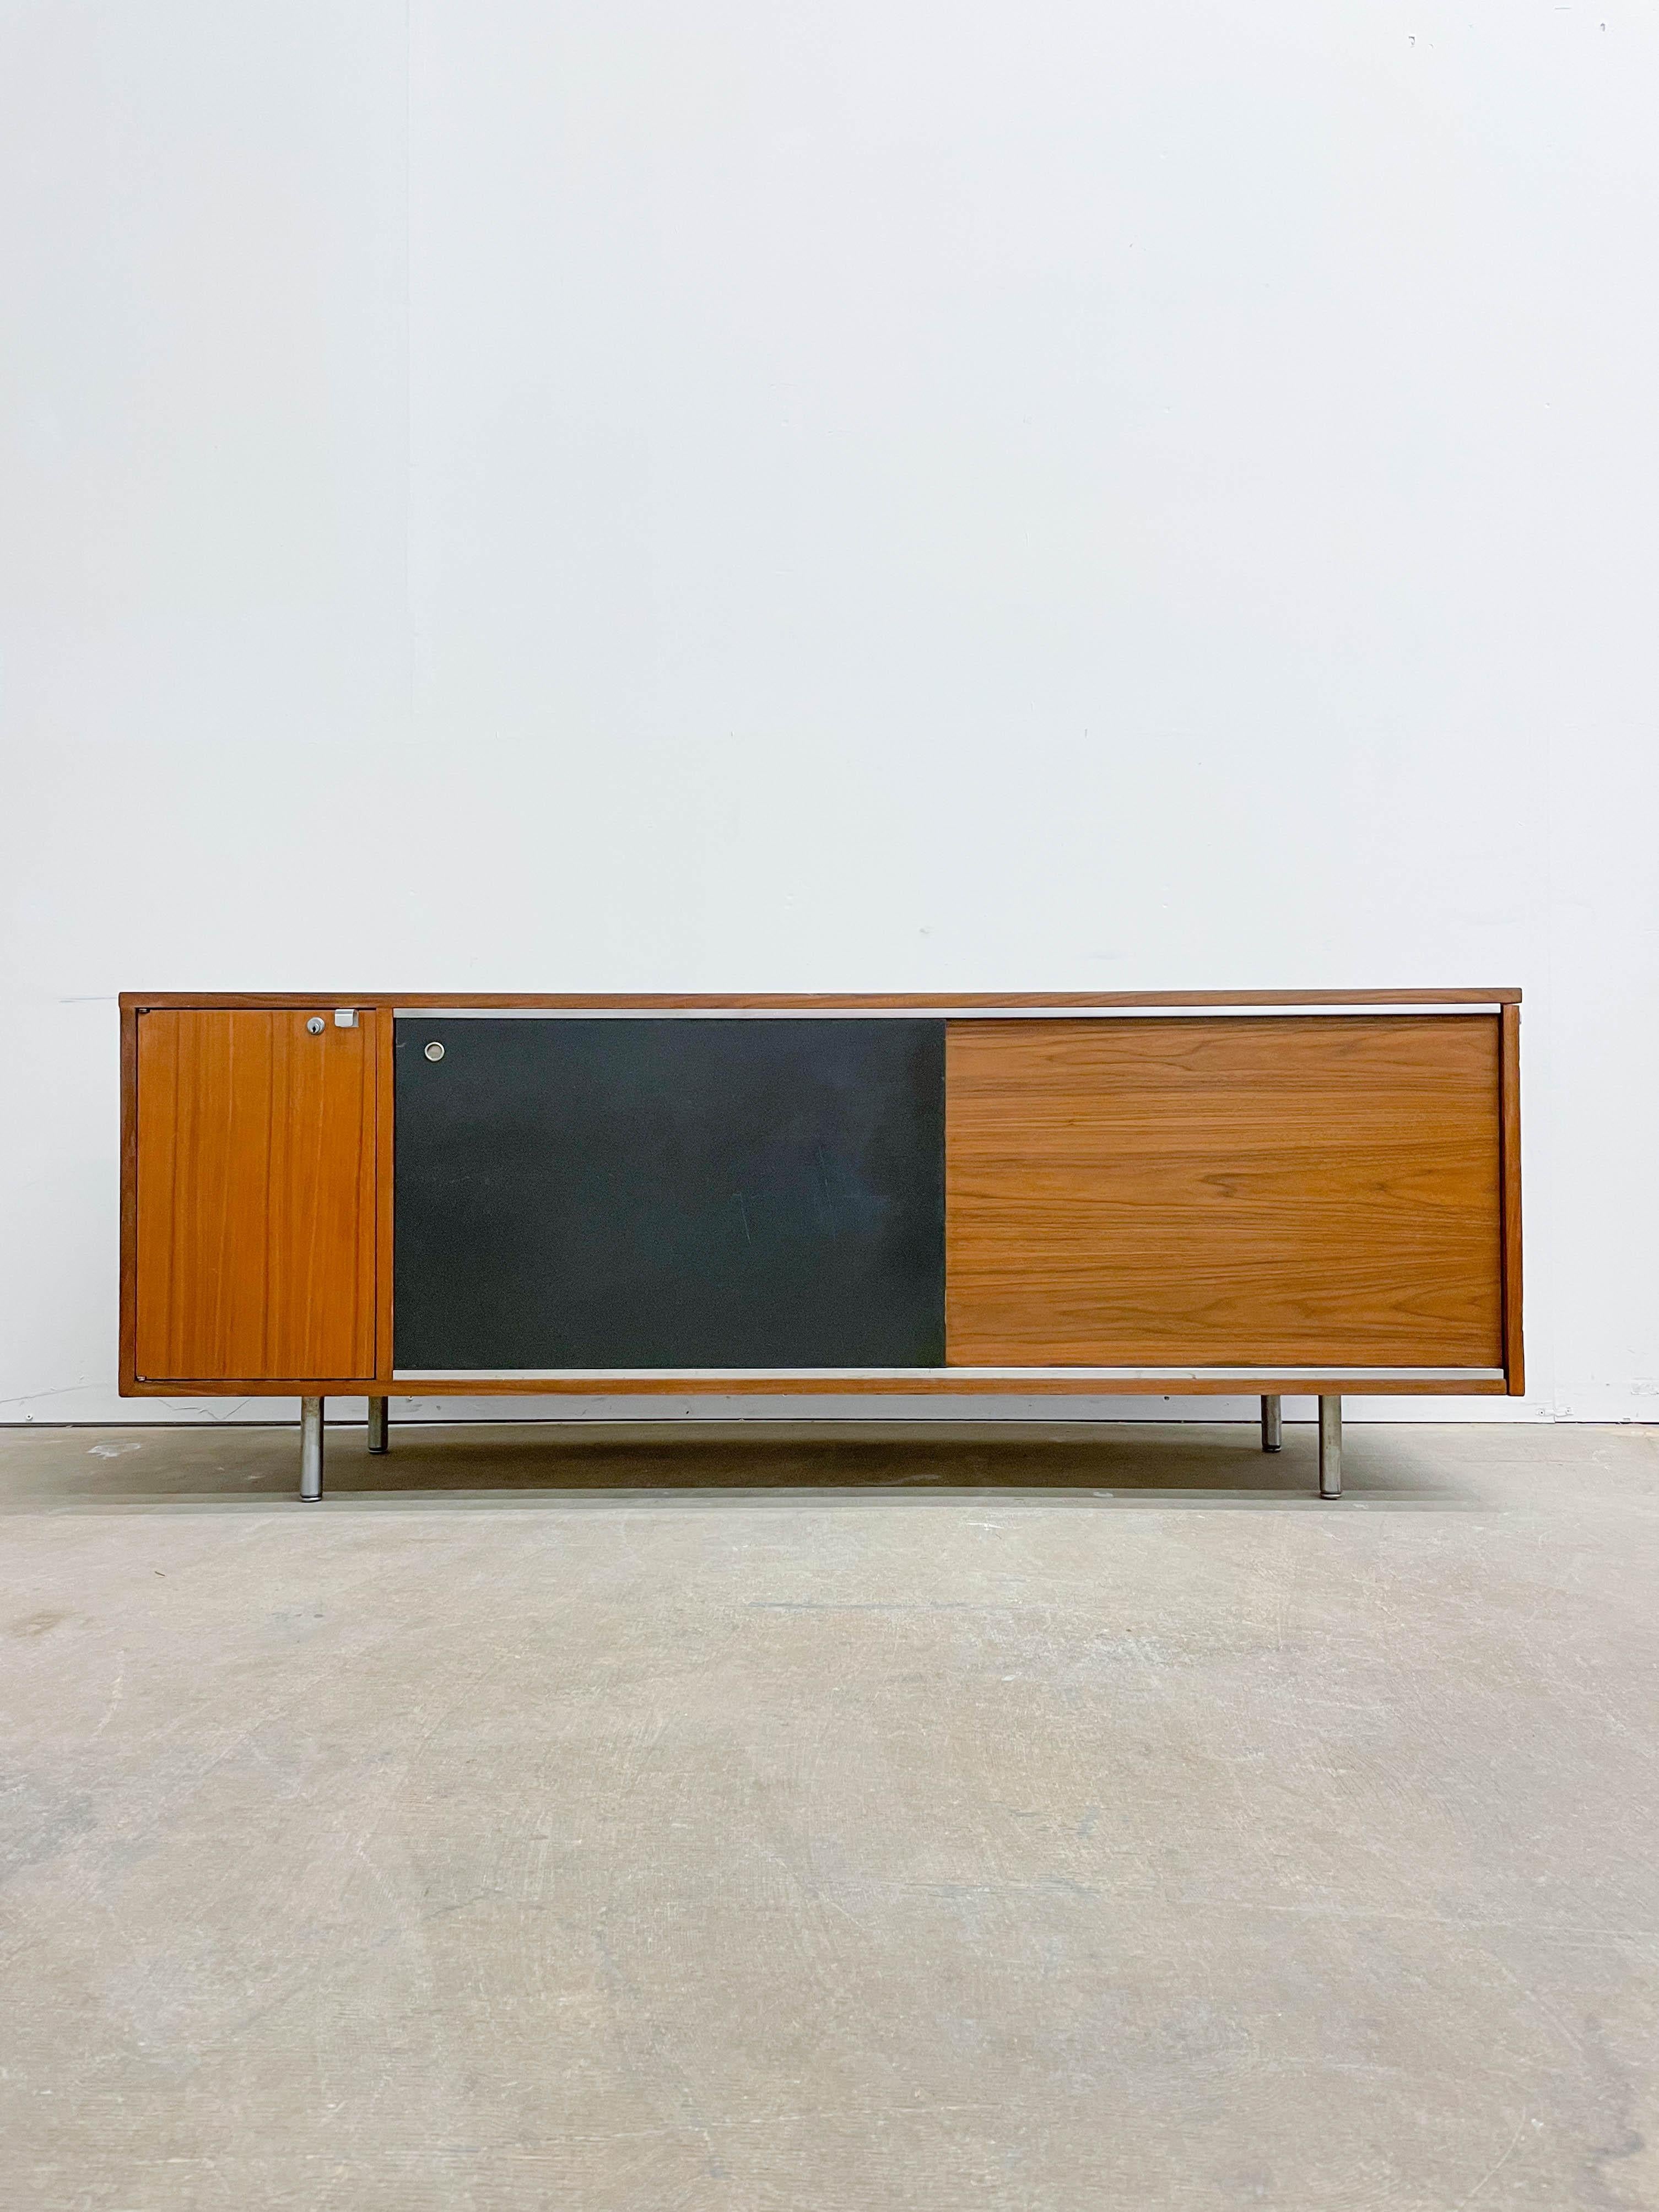 Early edition Credenza from George Nelson’s executive office group (EOG) from the early 1950s. This piece offer excellent storage in a variety of forms. There are five drawers behind the sliding panel, including one hanging file drawer, one large